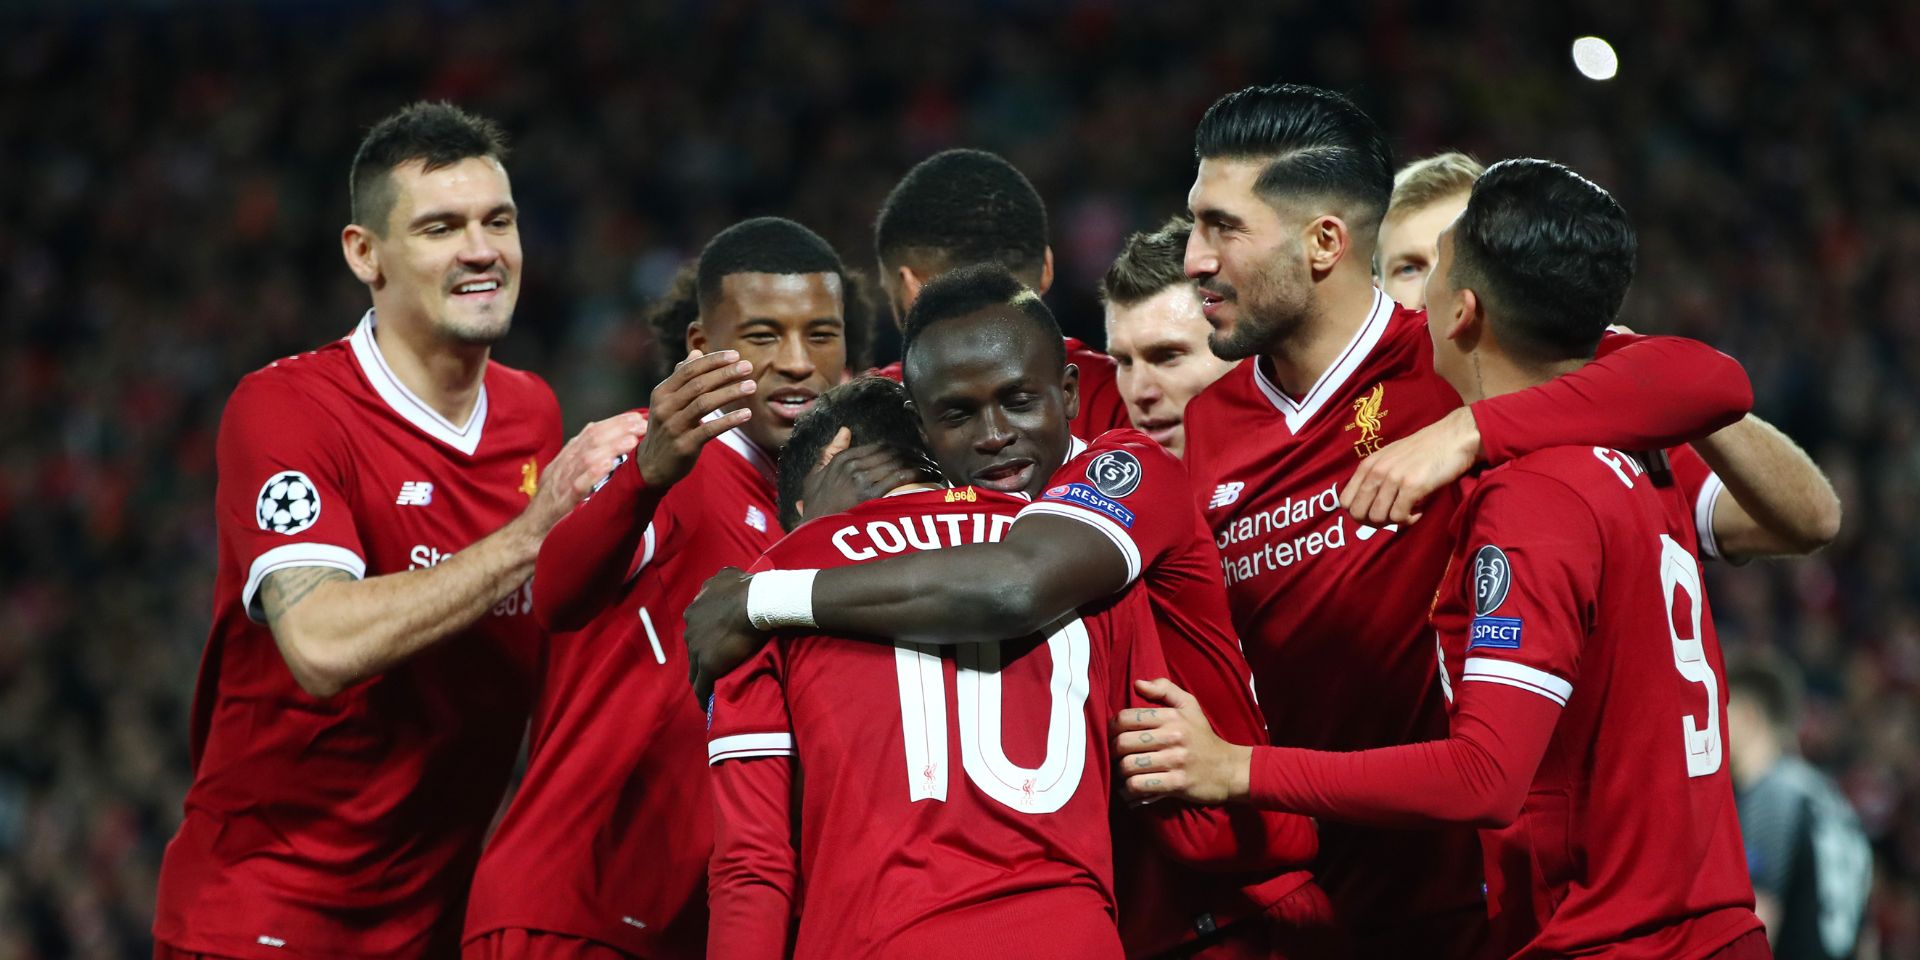 (Video) Liverpool players unite in heartfelt message to former Red after career change